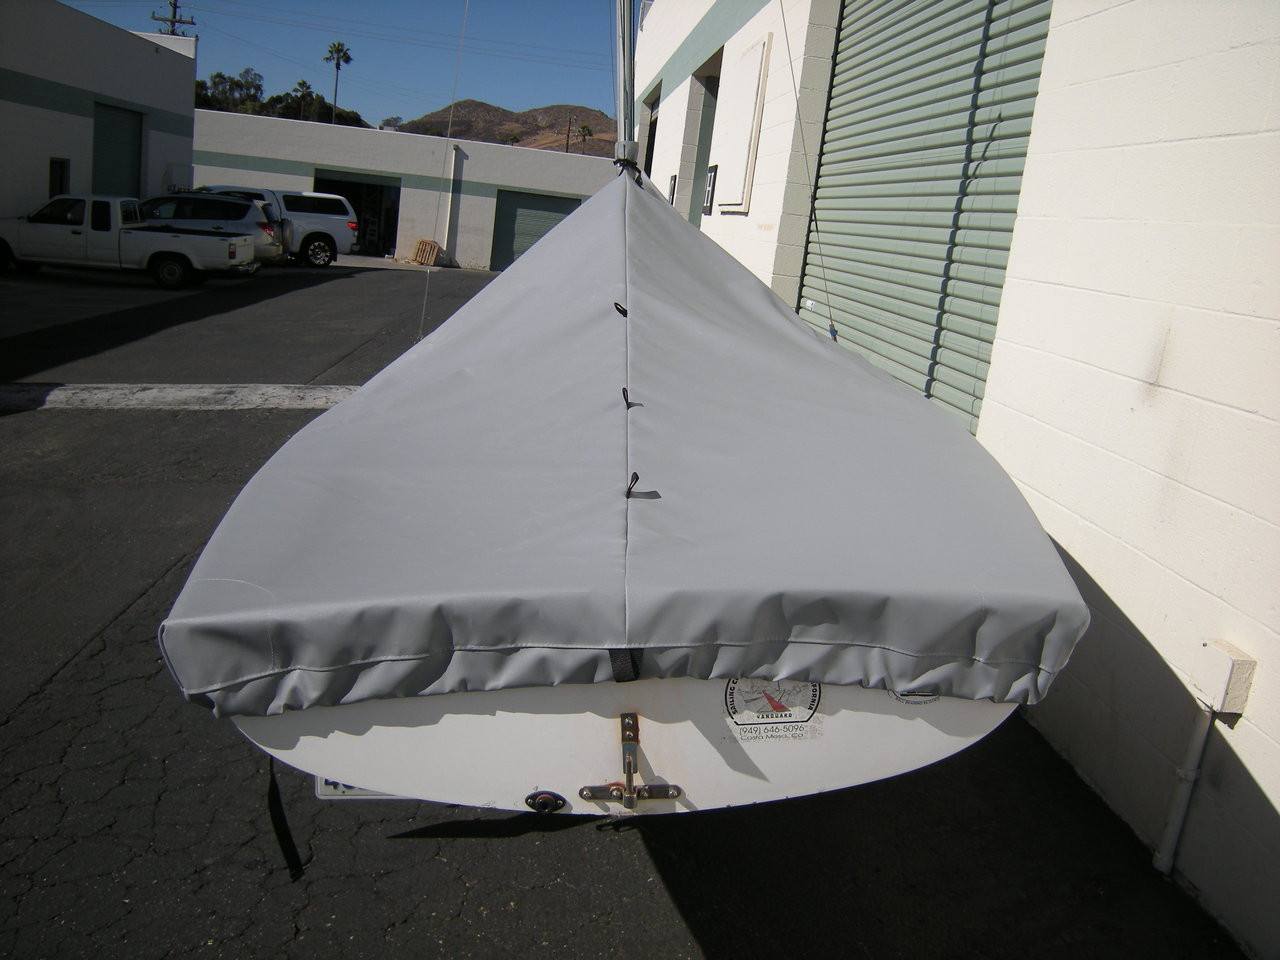 420 sailboat Mast Up Peaked Cover by SLO Sail and Canvas. Reinforcements positioned over blocks and cleats prevent chafing.
